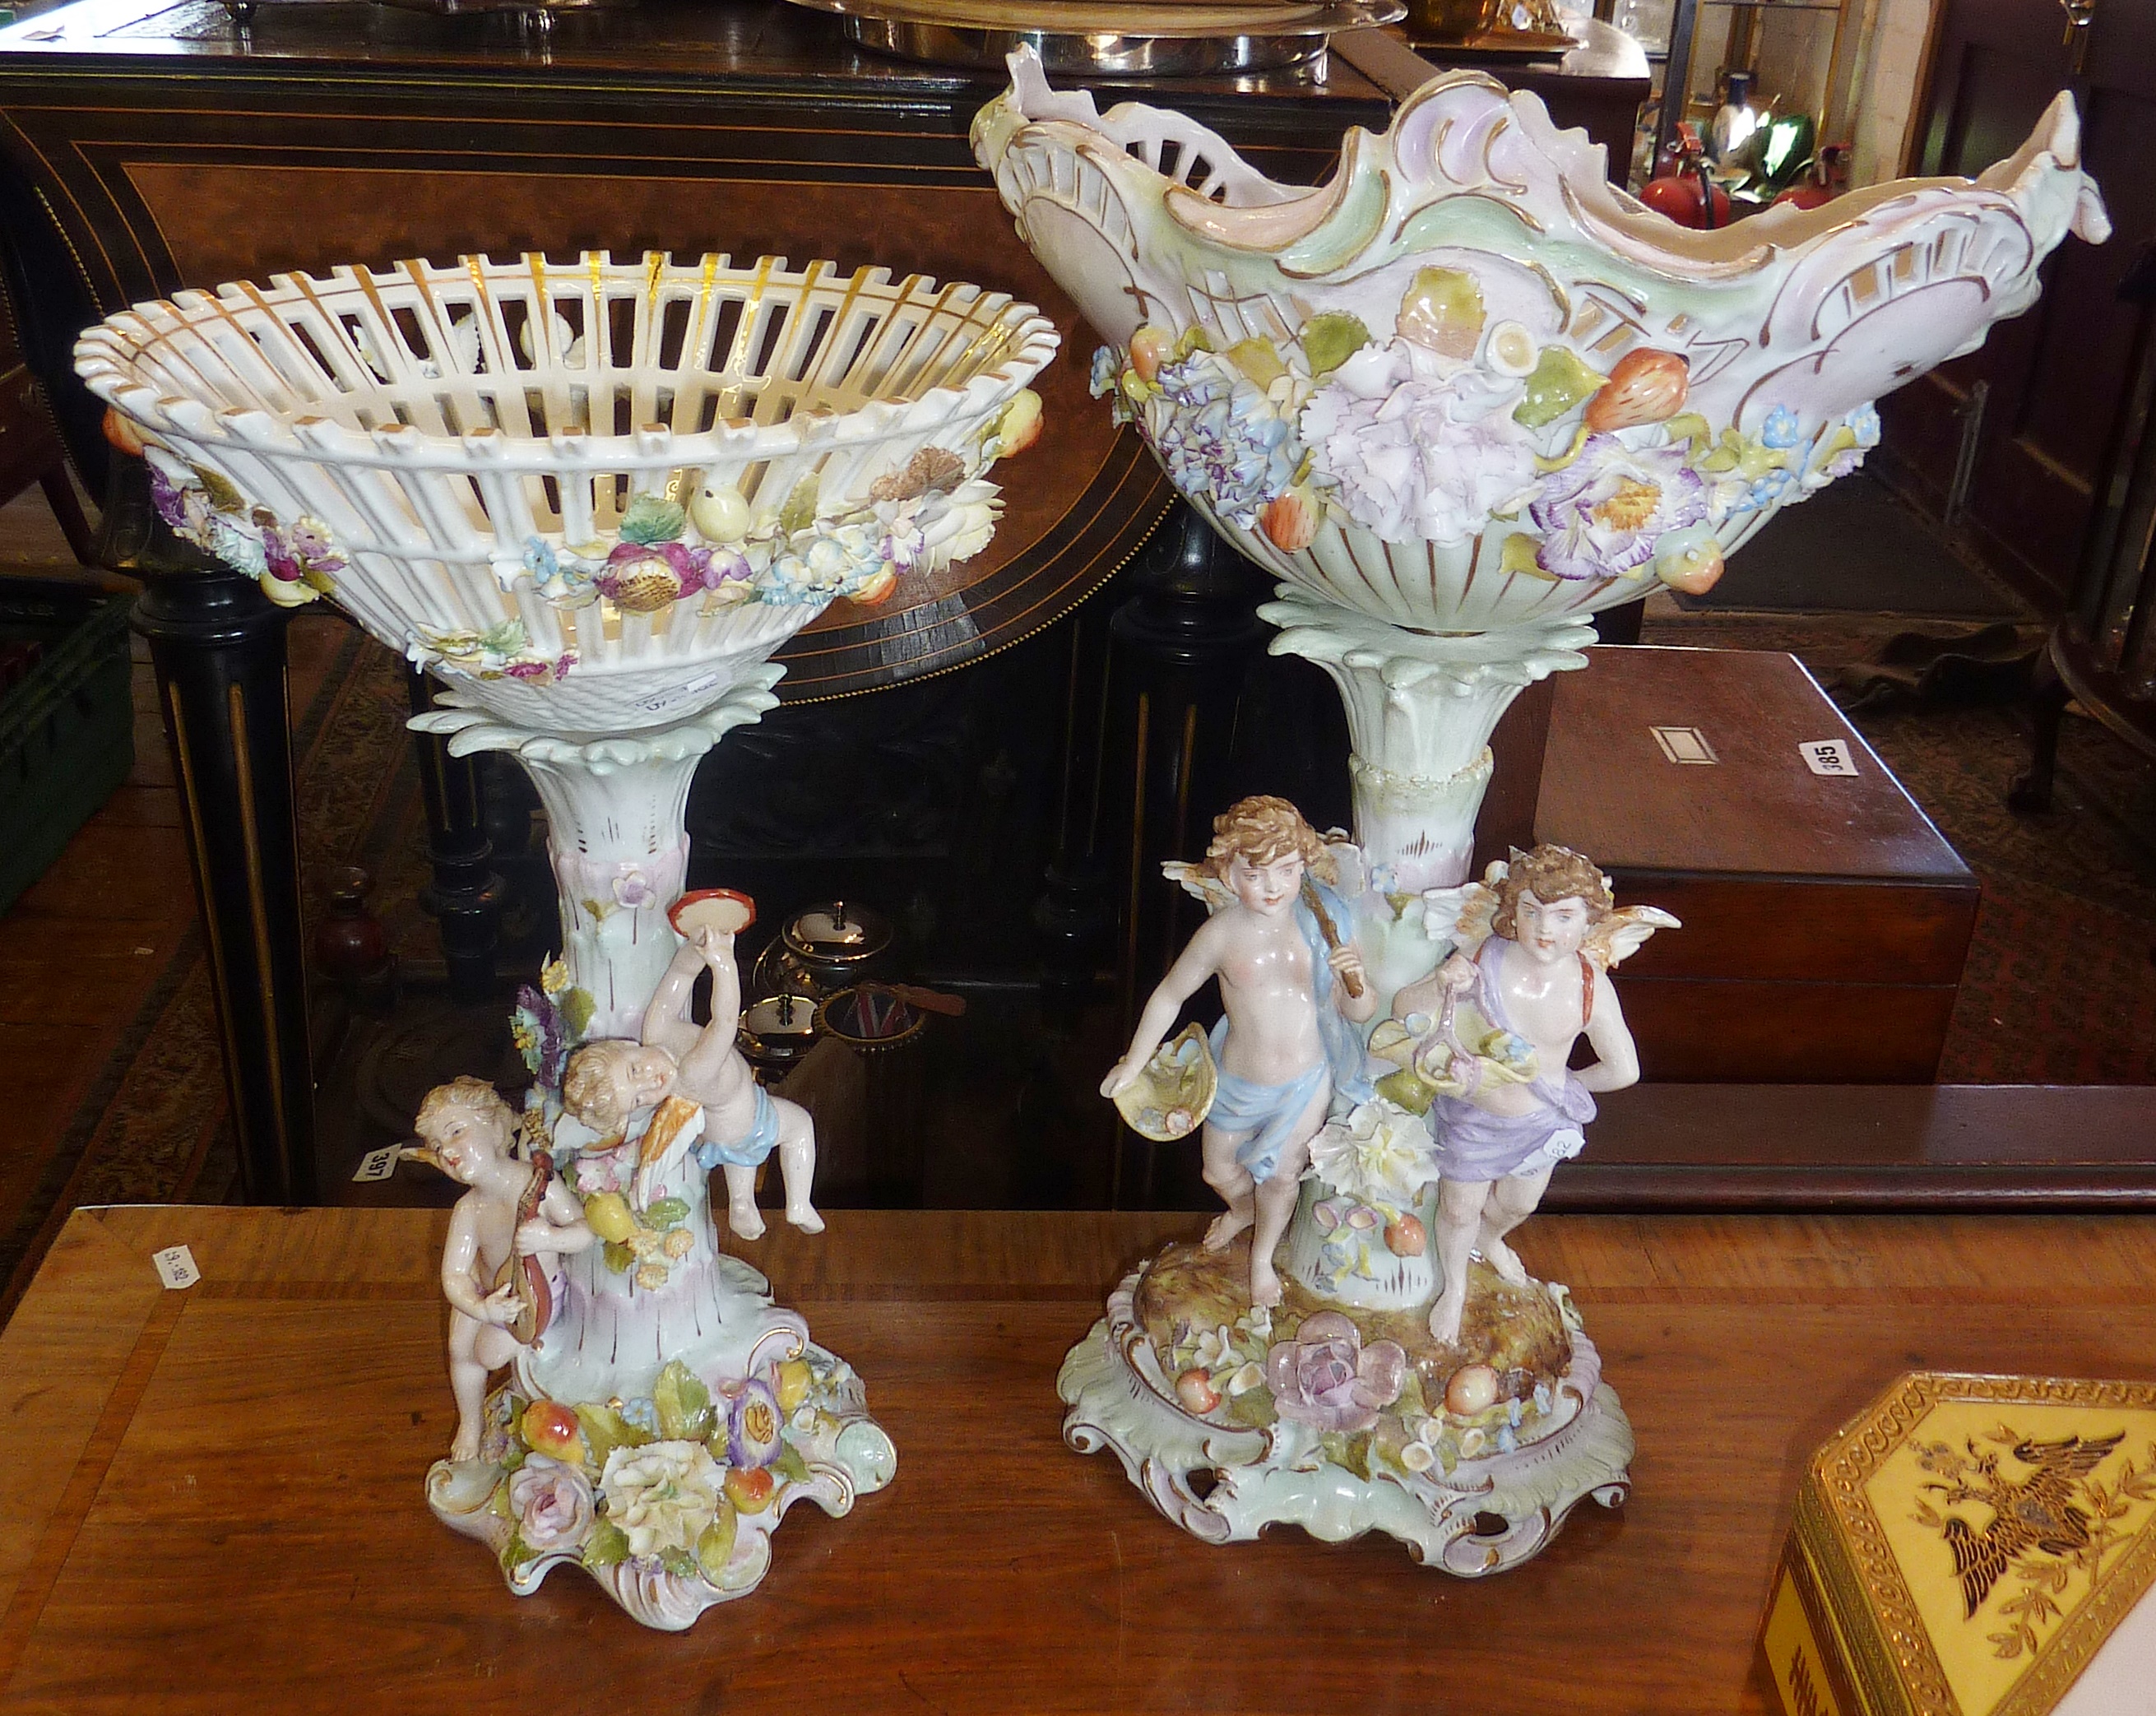 Austrian or German porcelain figural centrepieces, decorated with cherubs and flowers (both